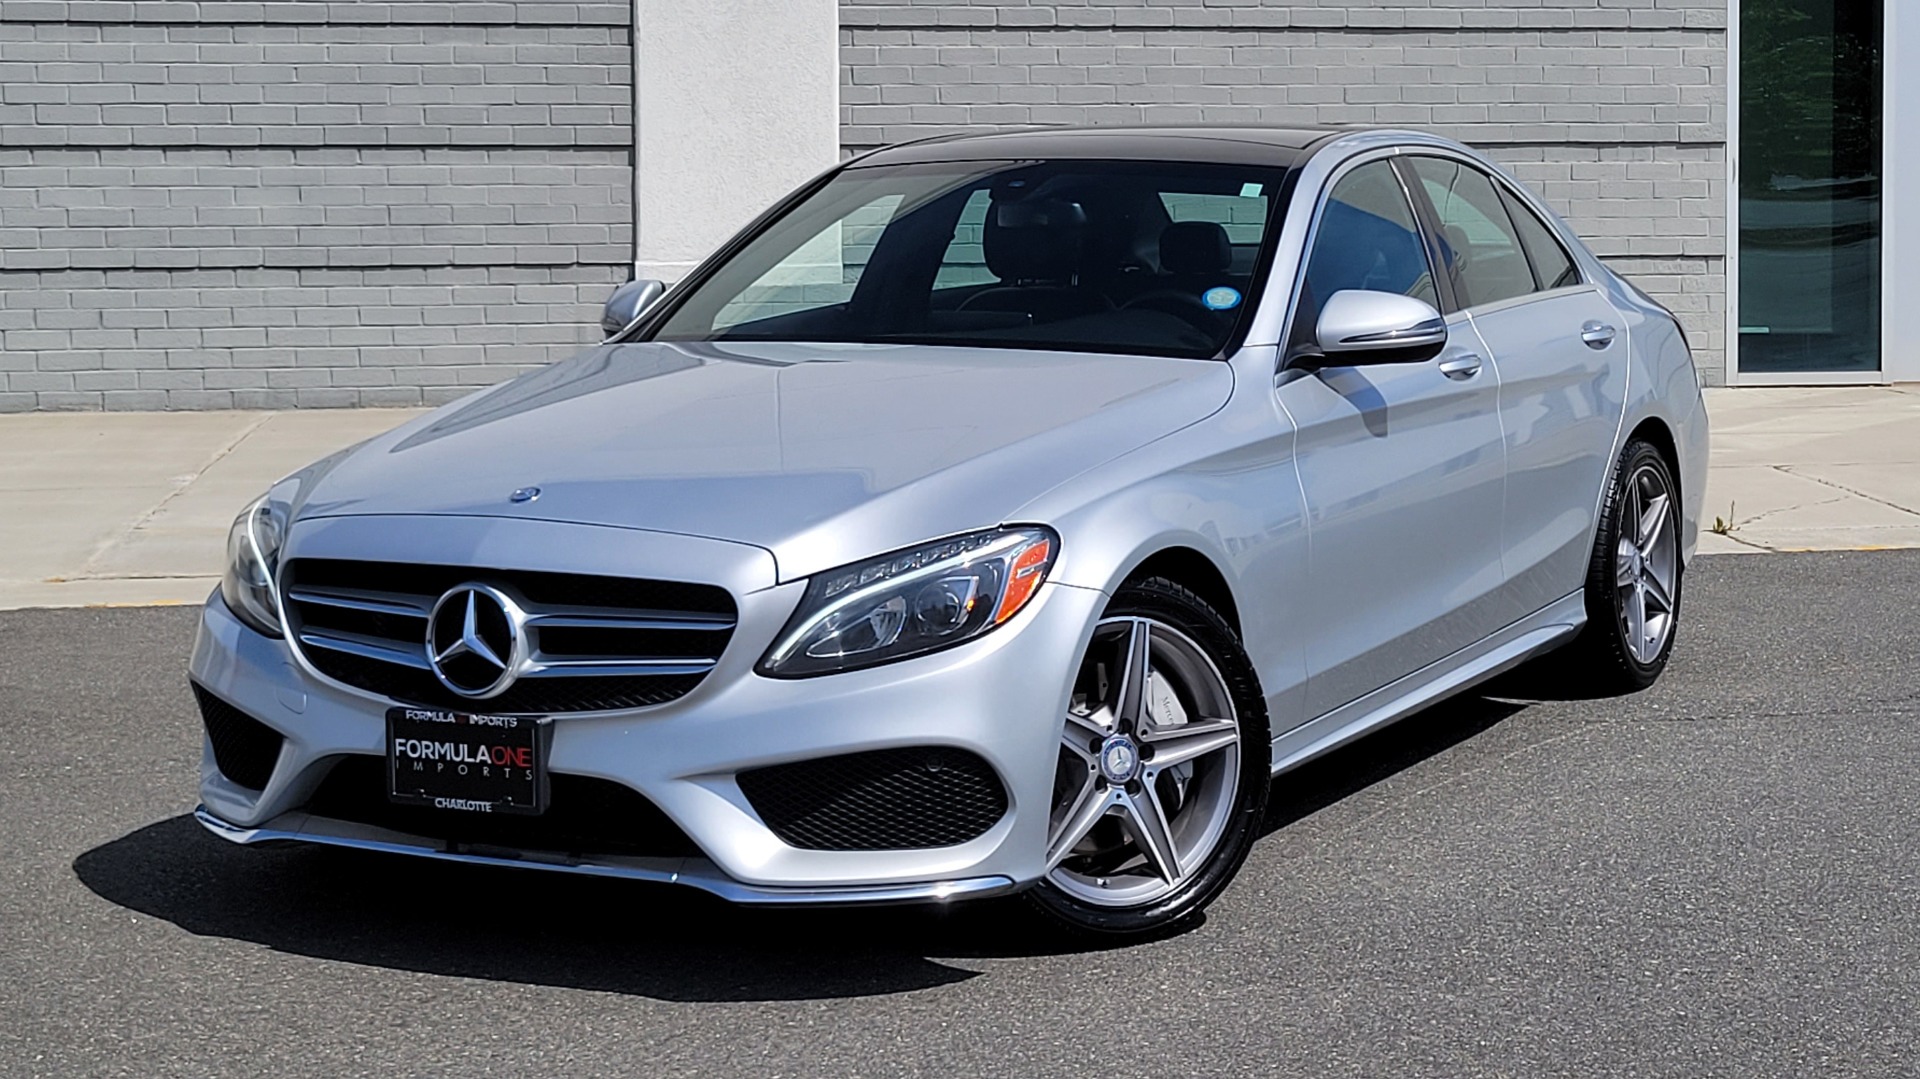 Used 2016 Mercedes-Benz C-CLASS C 300 PREMIUM 2 / SPORT / PANO-ROOF / BSA / HTD STS / MULTIMEDIA for sale Sold at Formula Imports in Charlotte NC 28227 1